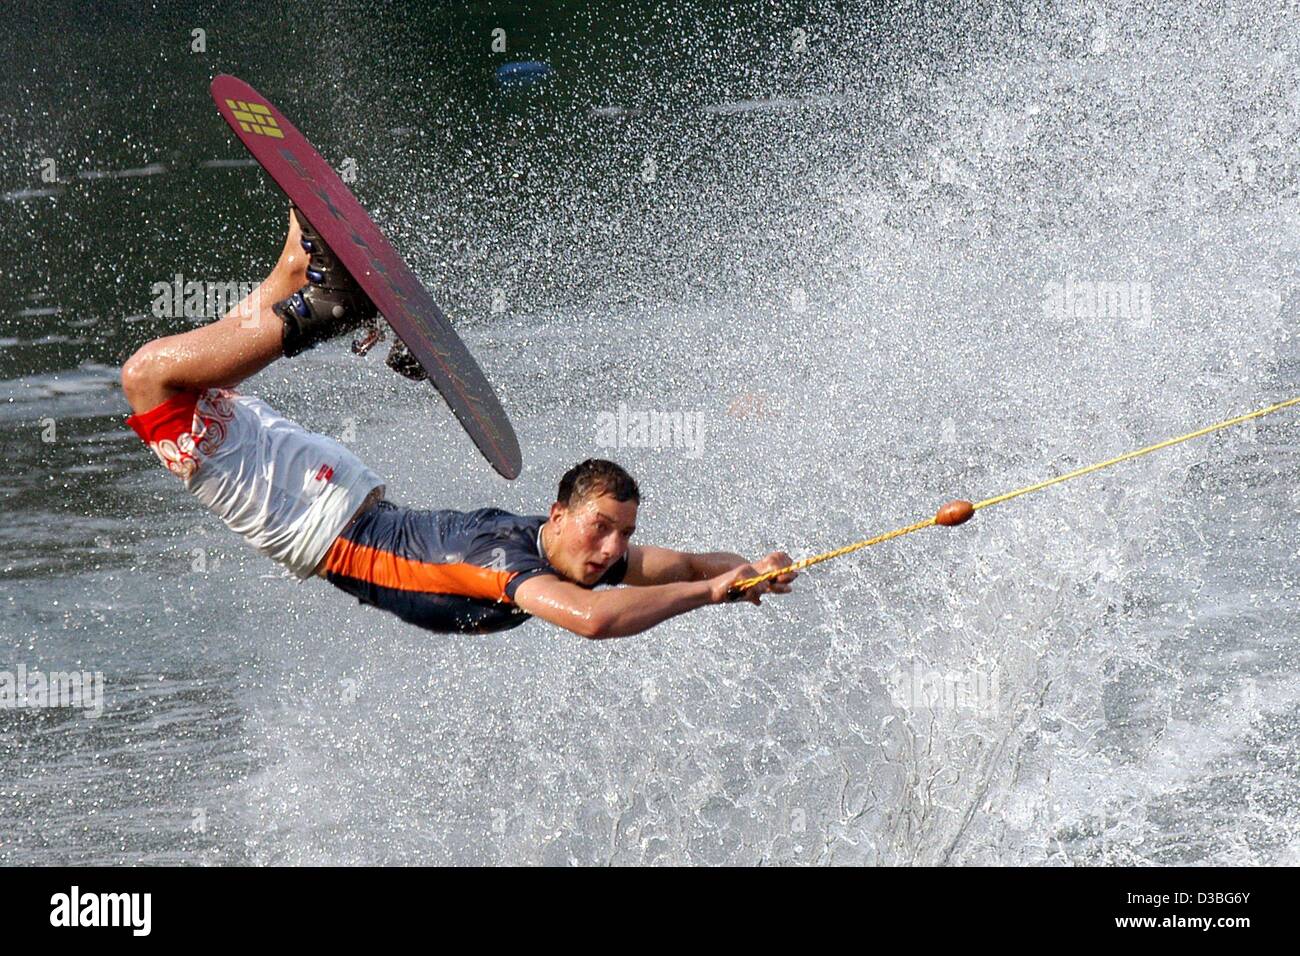 (dpa) - Water skier Christian Wagener flies through the air during his jump on Lake Twistesee near Bad Arolsen, central Germany, 3 June 2003. Stock Photo